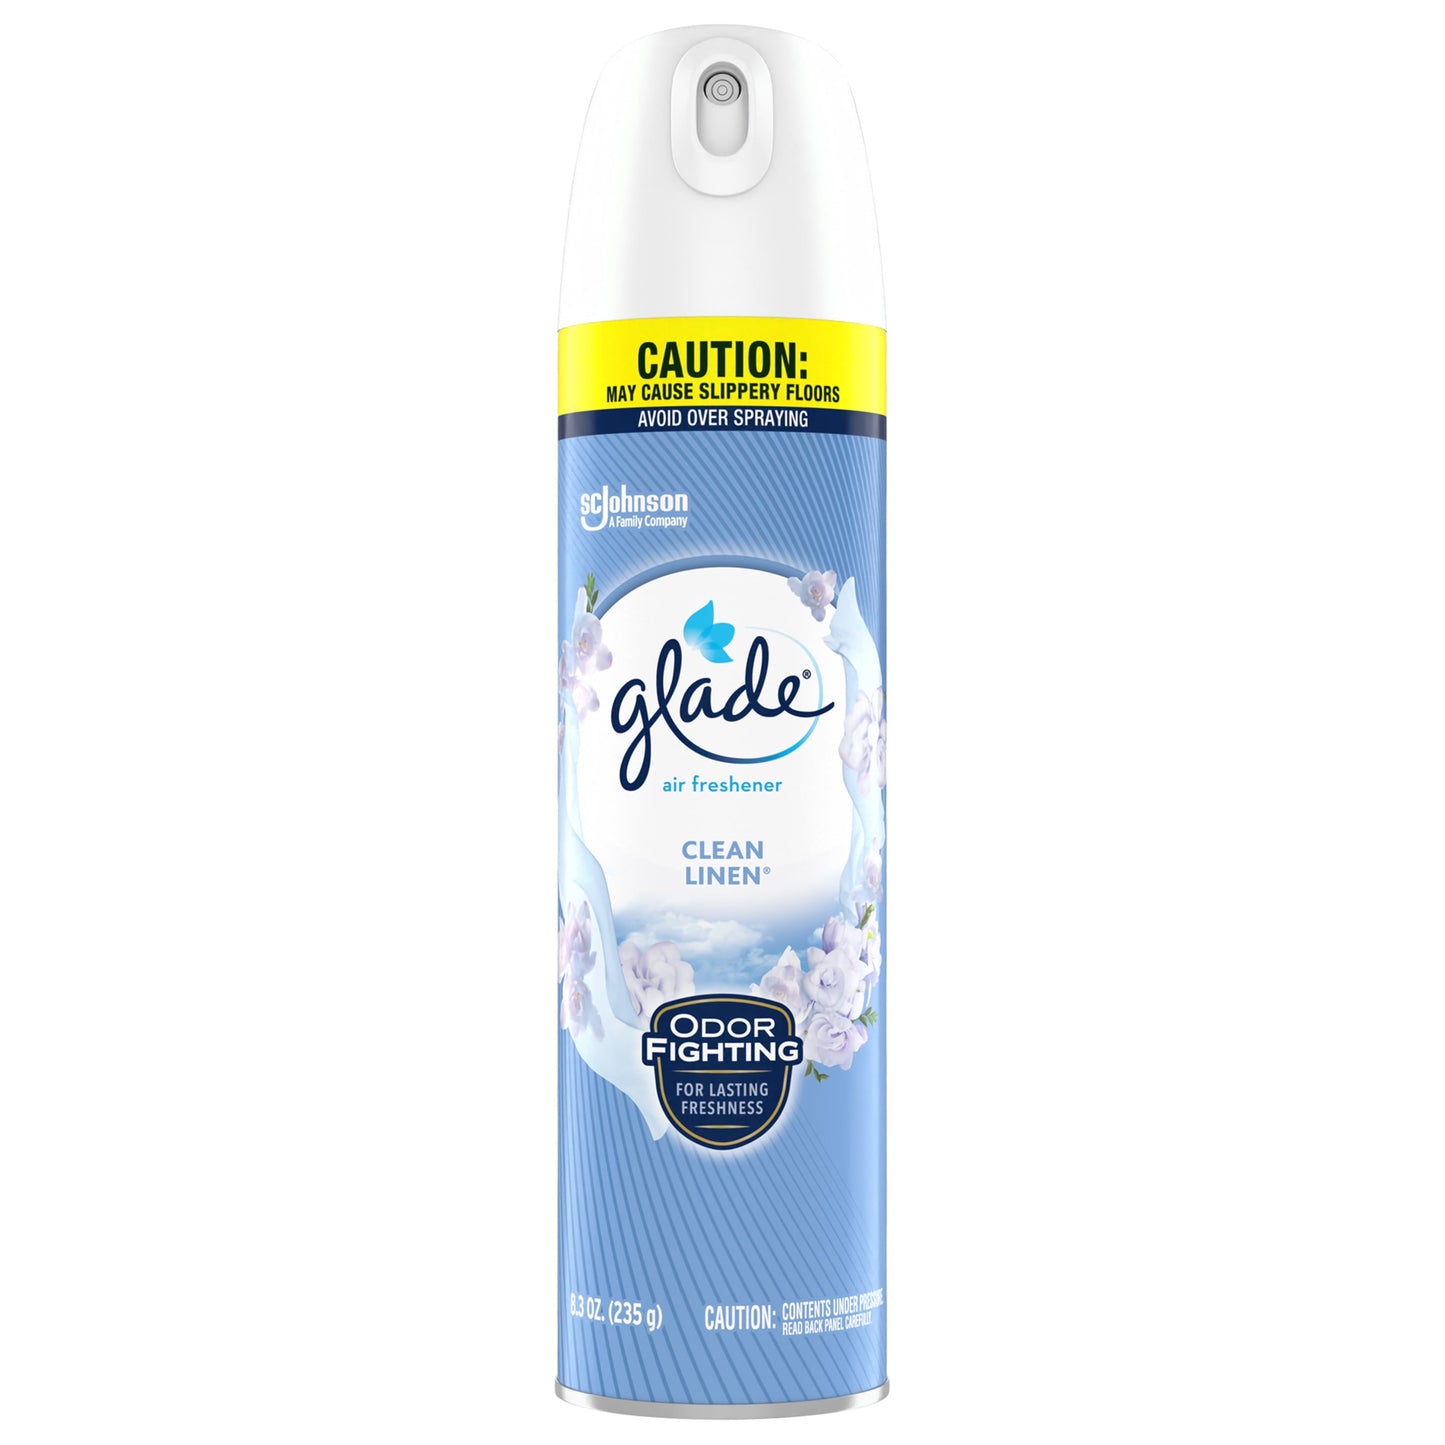 Glade Aerosol Spray, Air Freshener for Home, Clean Linen Scent, Fragrance Infused with Essential Oils, Invigorating and Refreshing, with 100% Natural Propellent, 8.3 oz